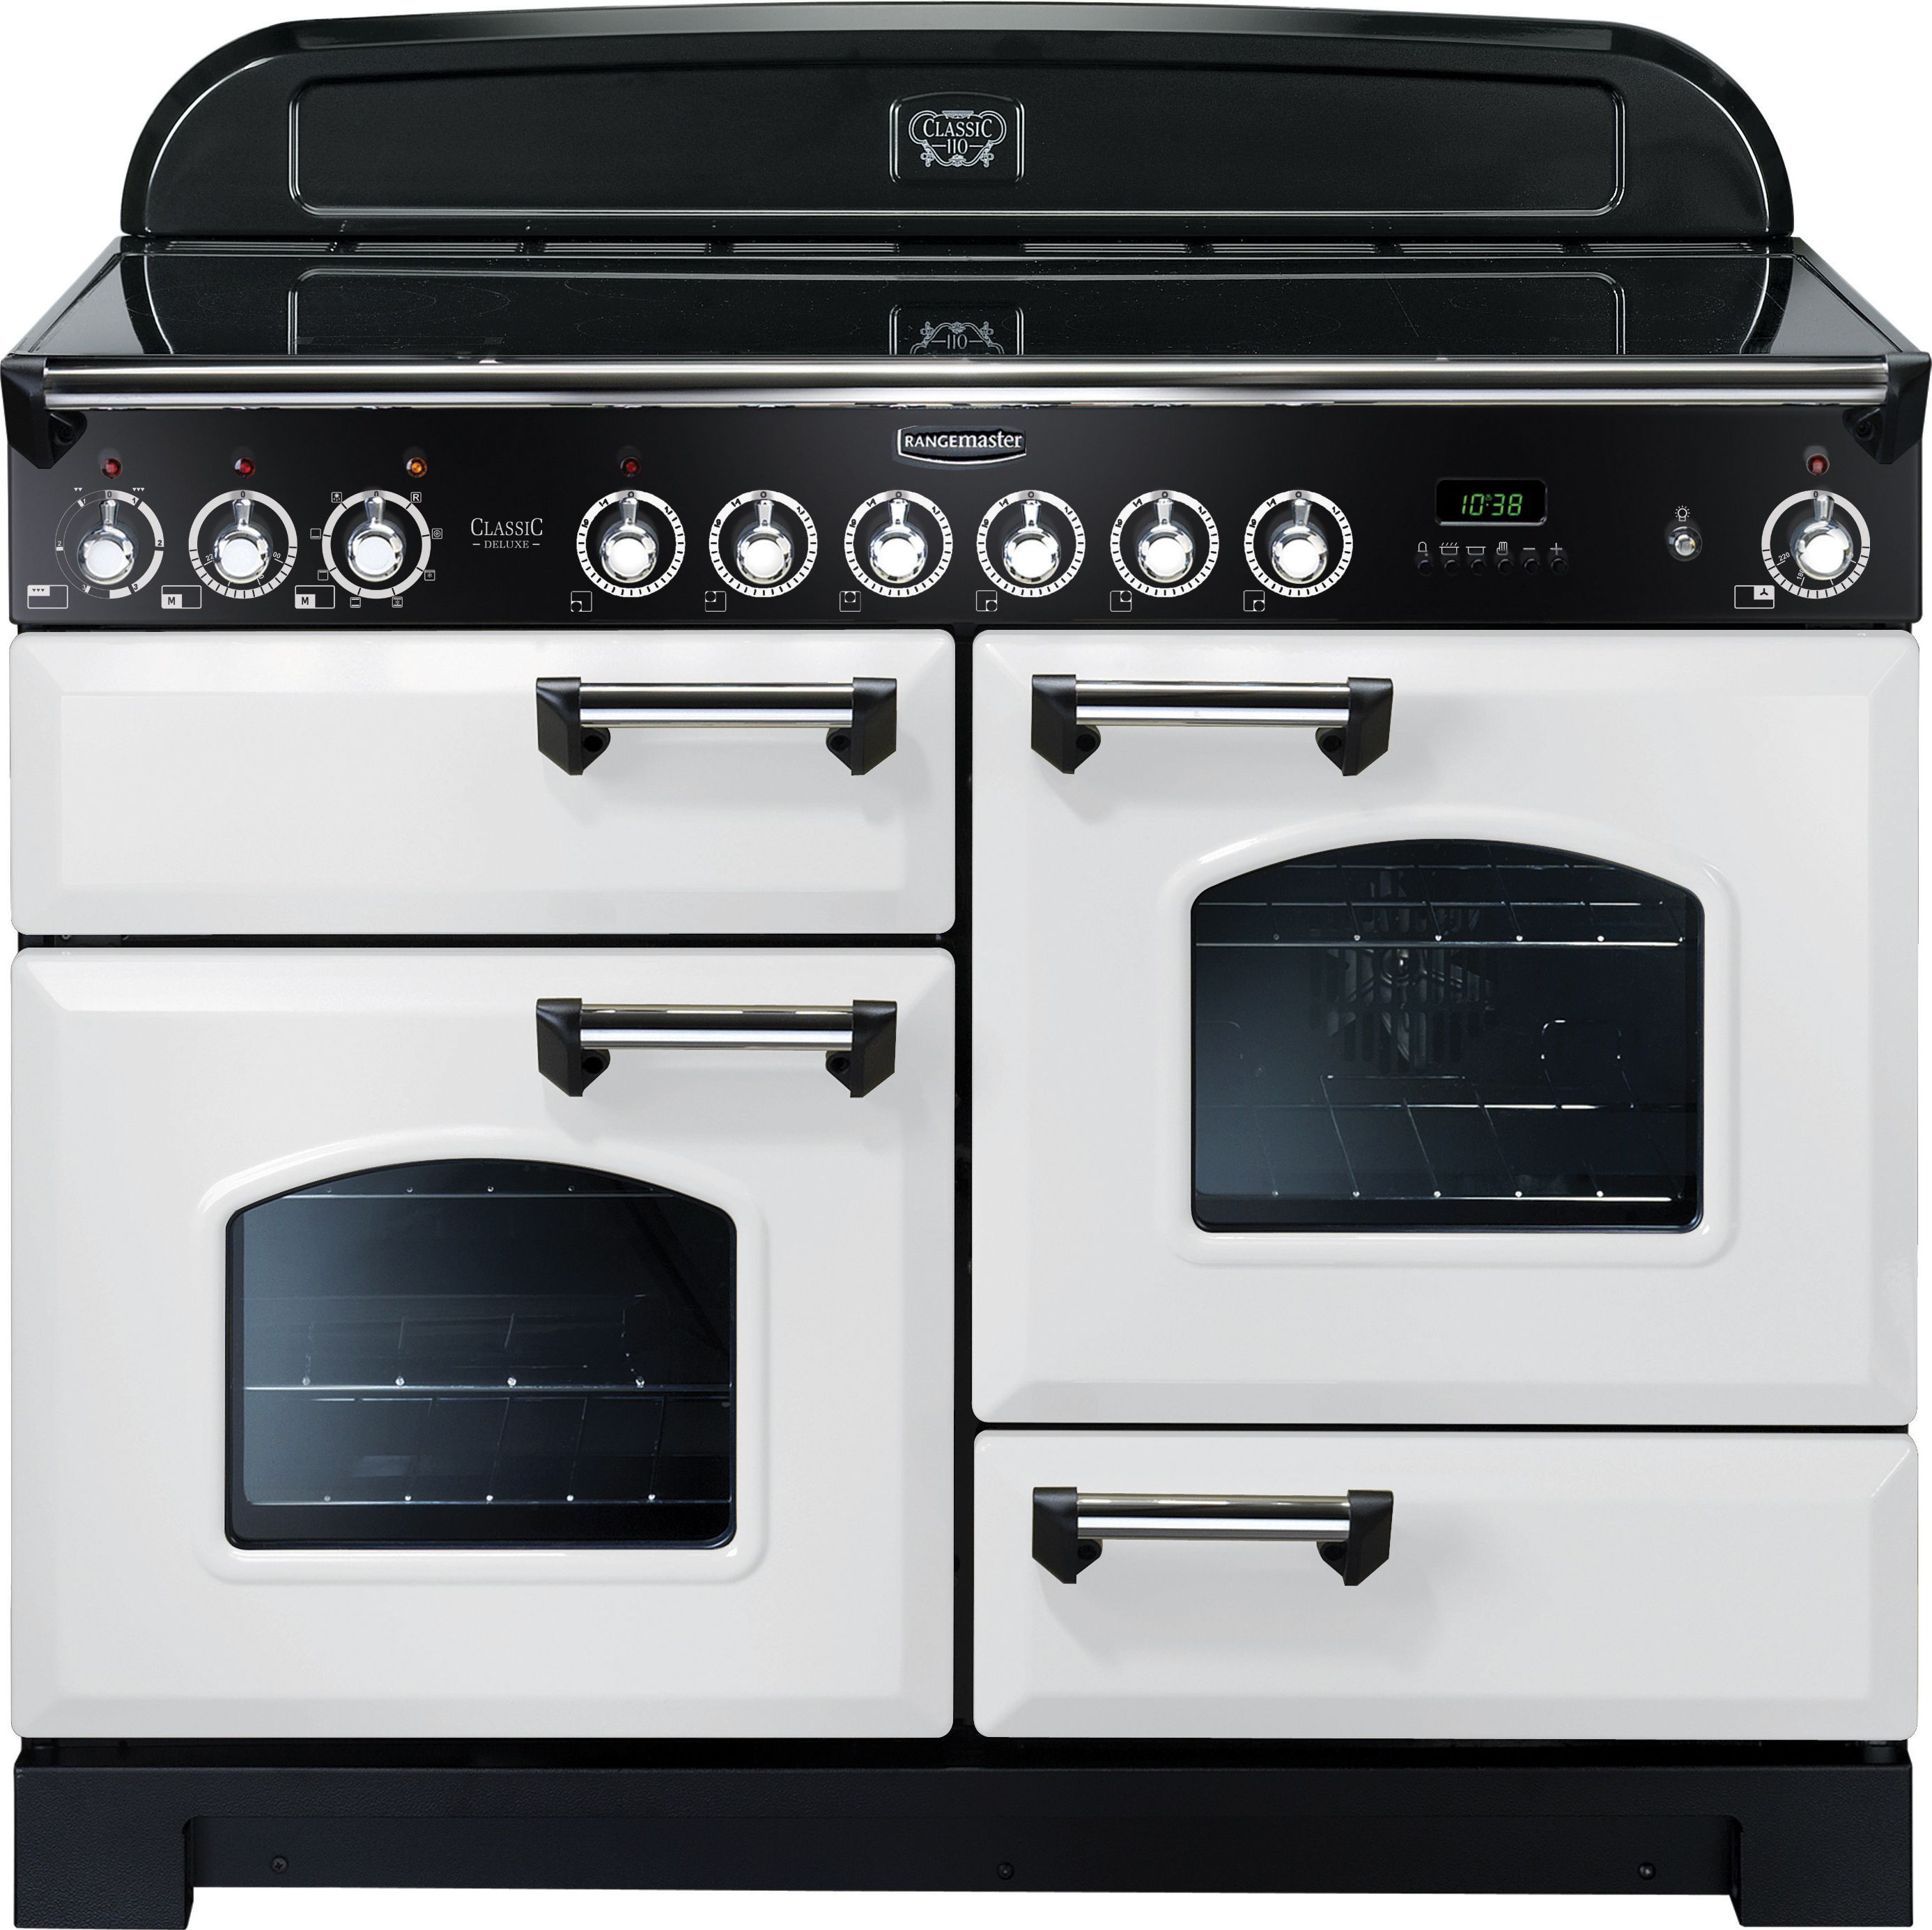 Rangemaster Classic Deluxe CDL110ECWH/C 110cm Electric Range Cooker with Ceramic Hob - White / Chrome - A/A Rated, White